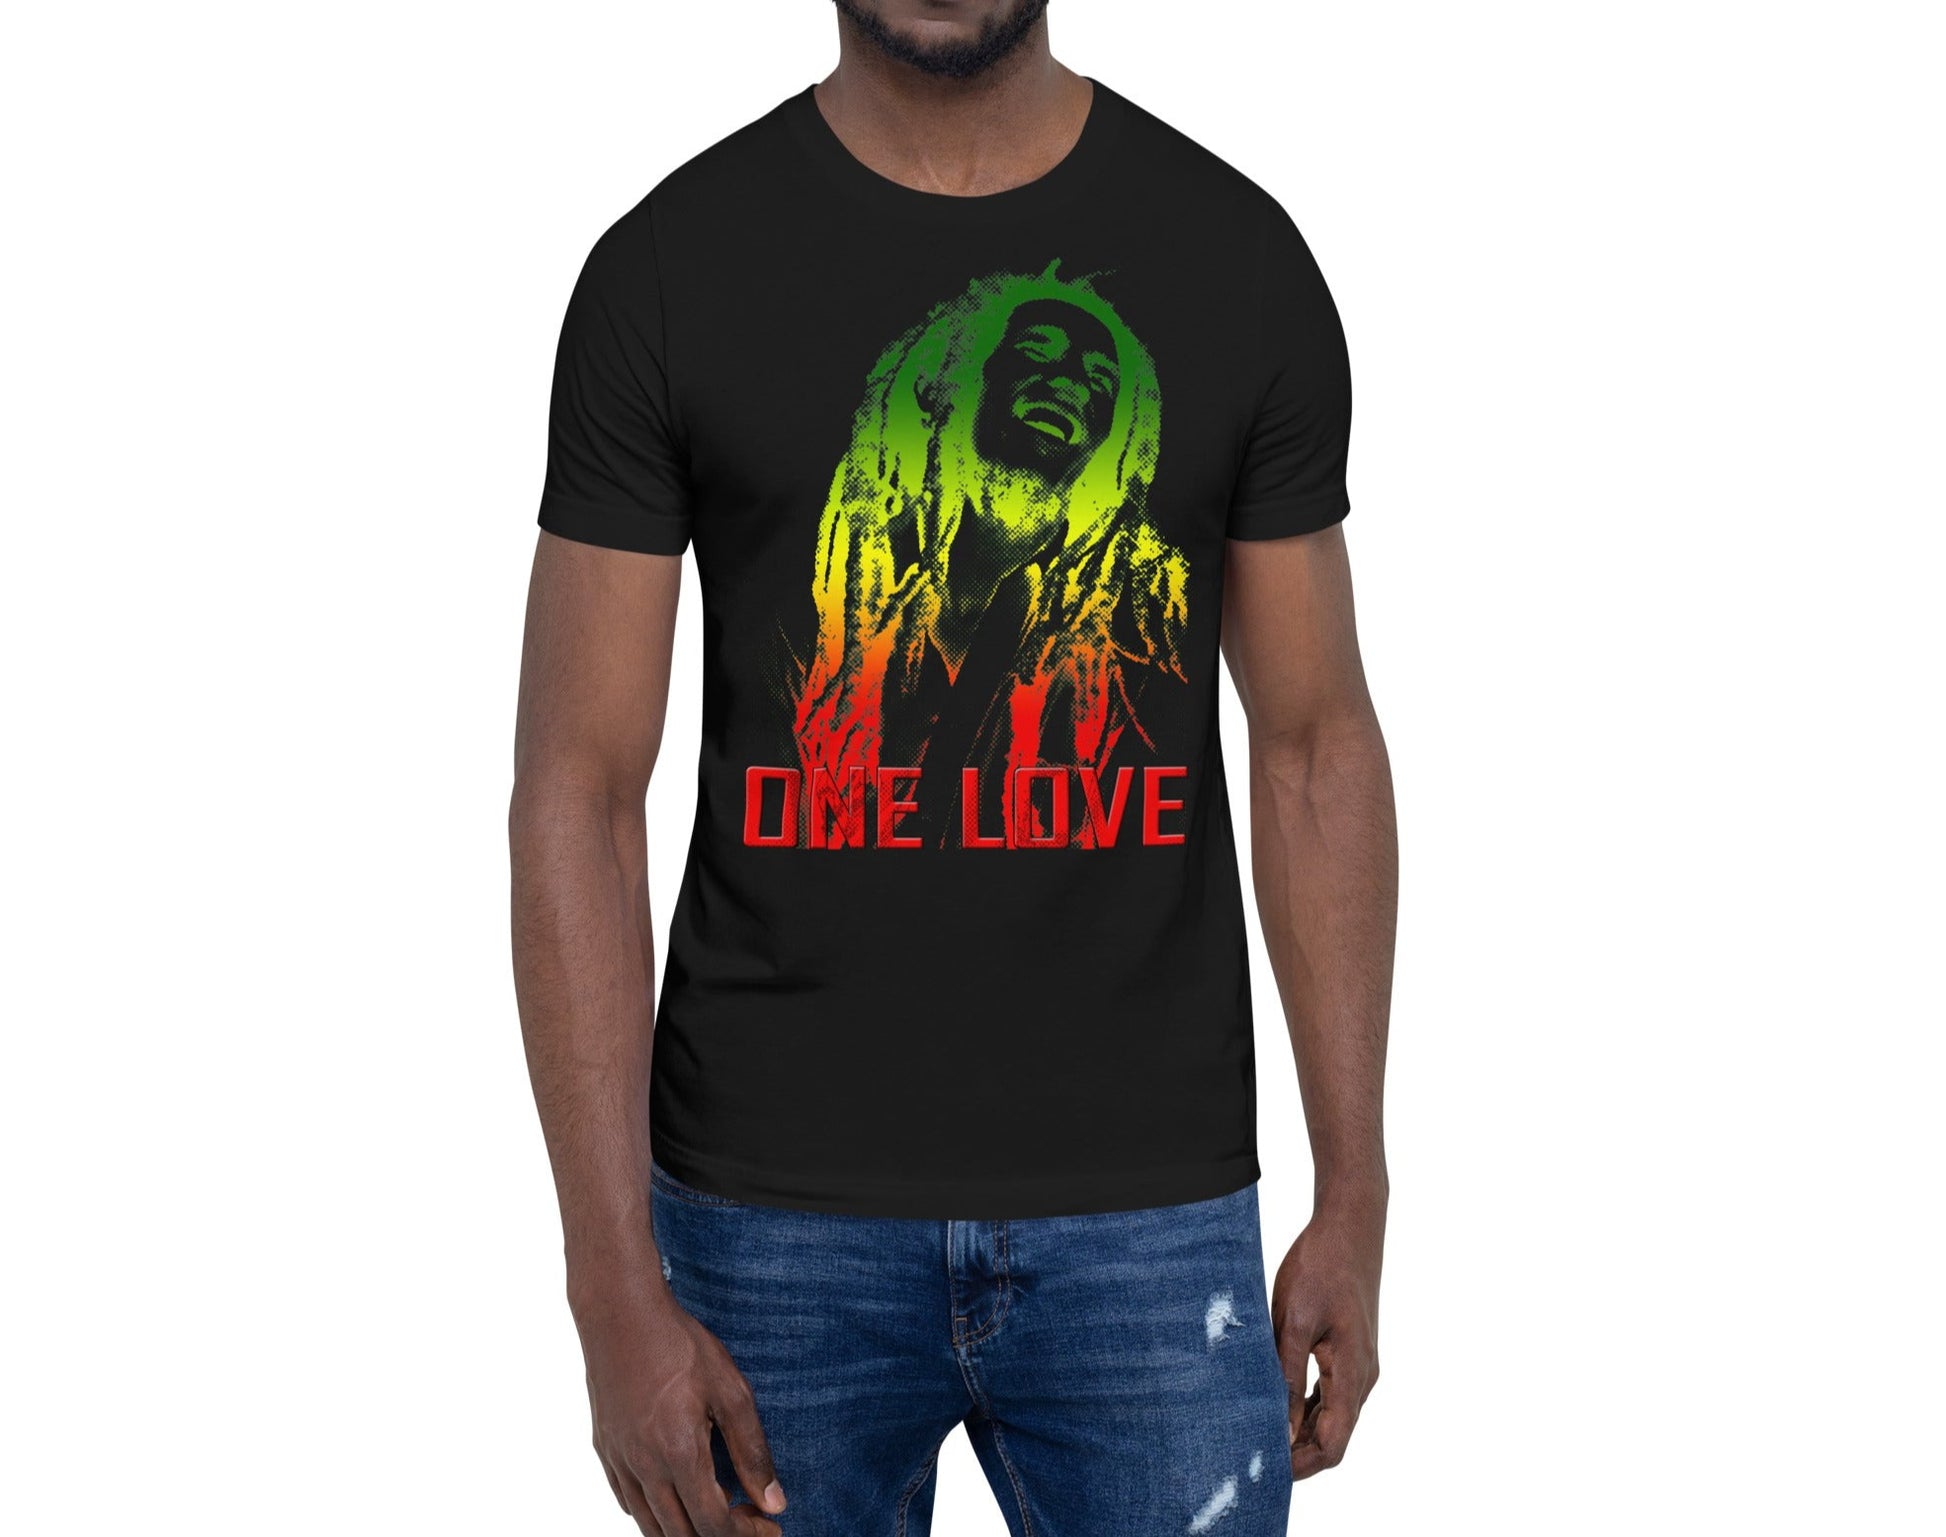 Bob Marley 'One Love' Quote T-Shirt Design